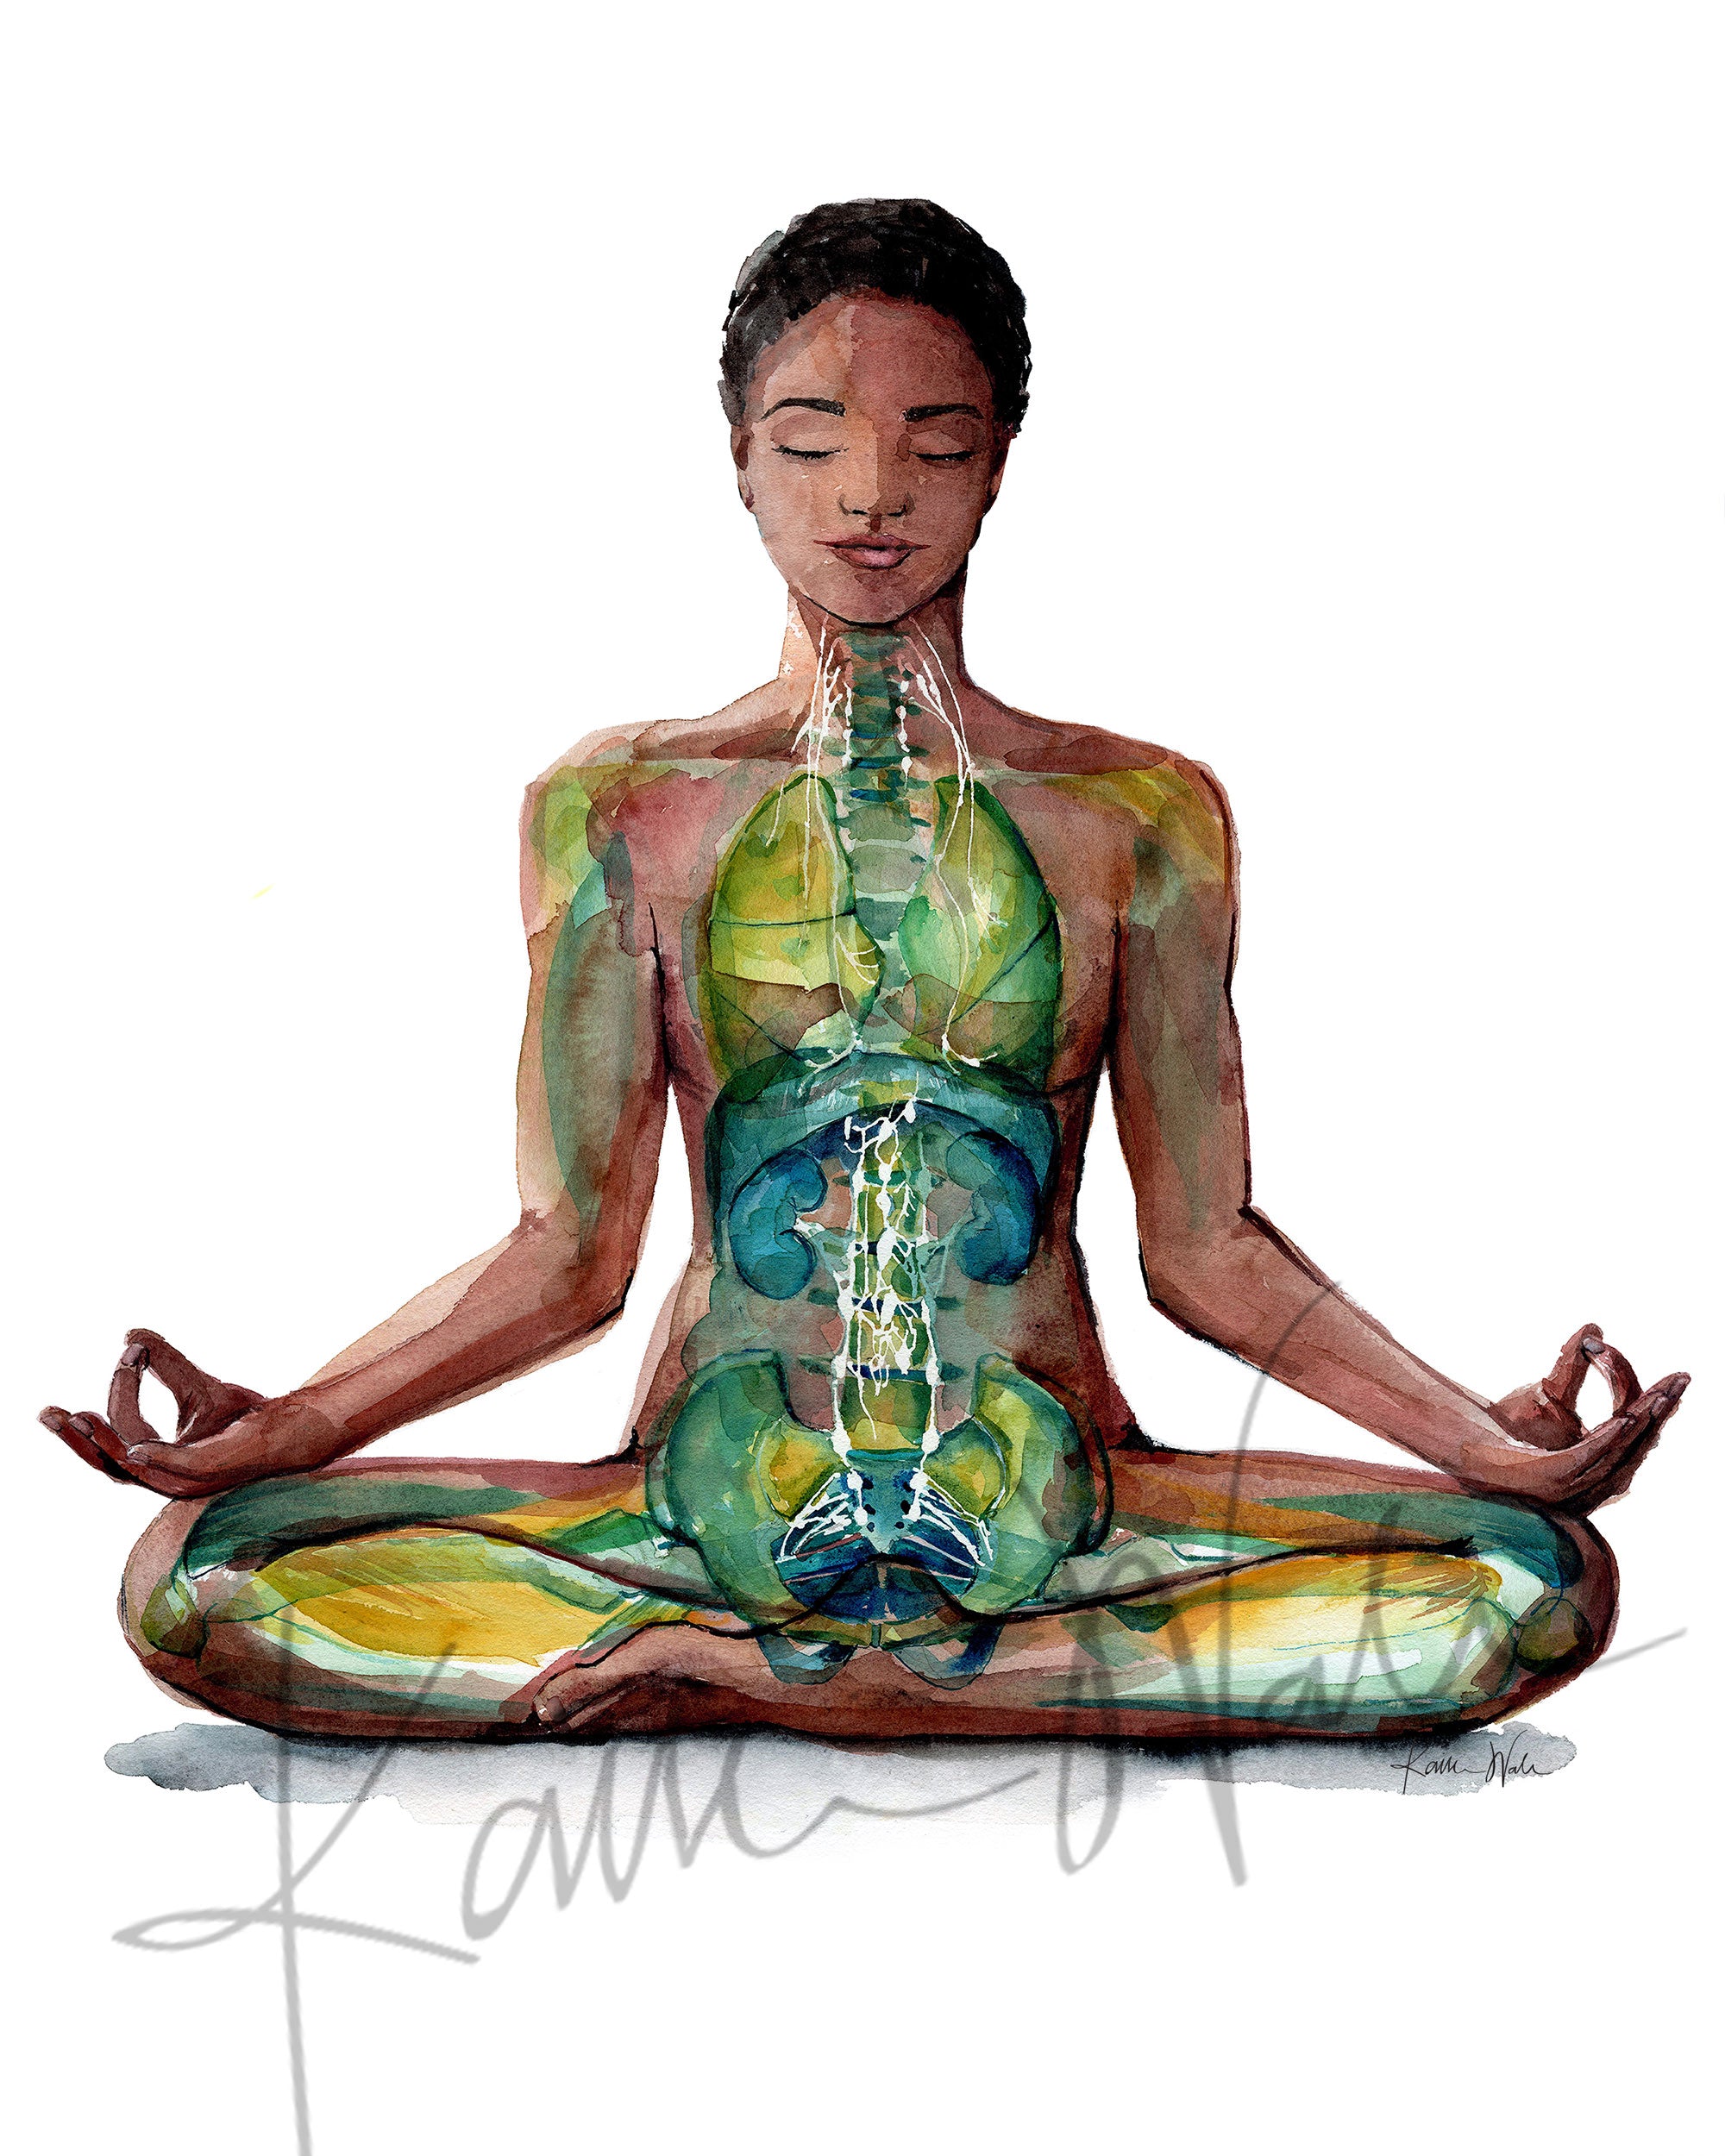 Unframed watercolor painting of a painting of a woman of color in a peaceful yoga pose.